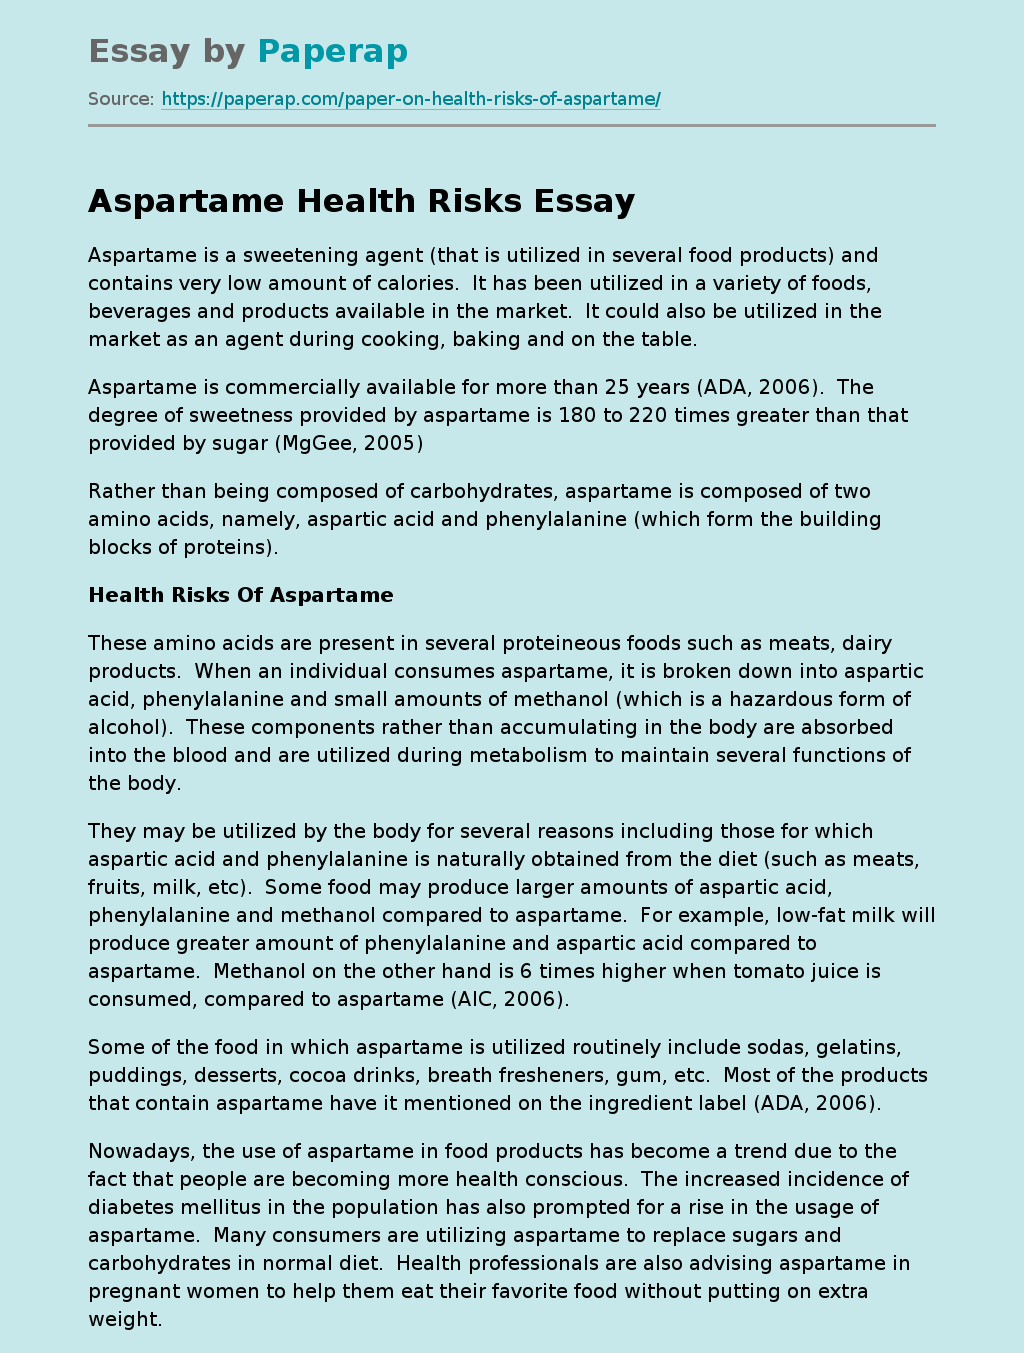 Health Risks From Aspartame